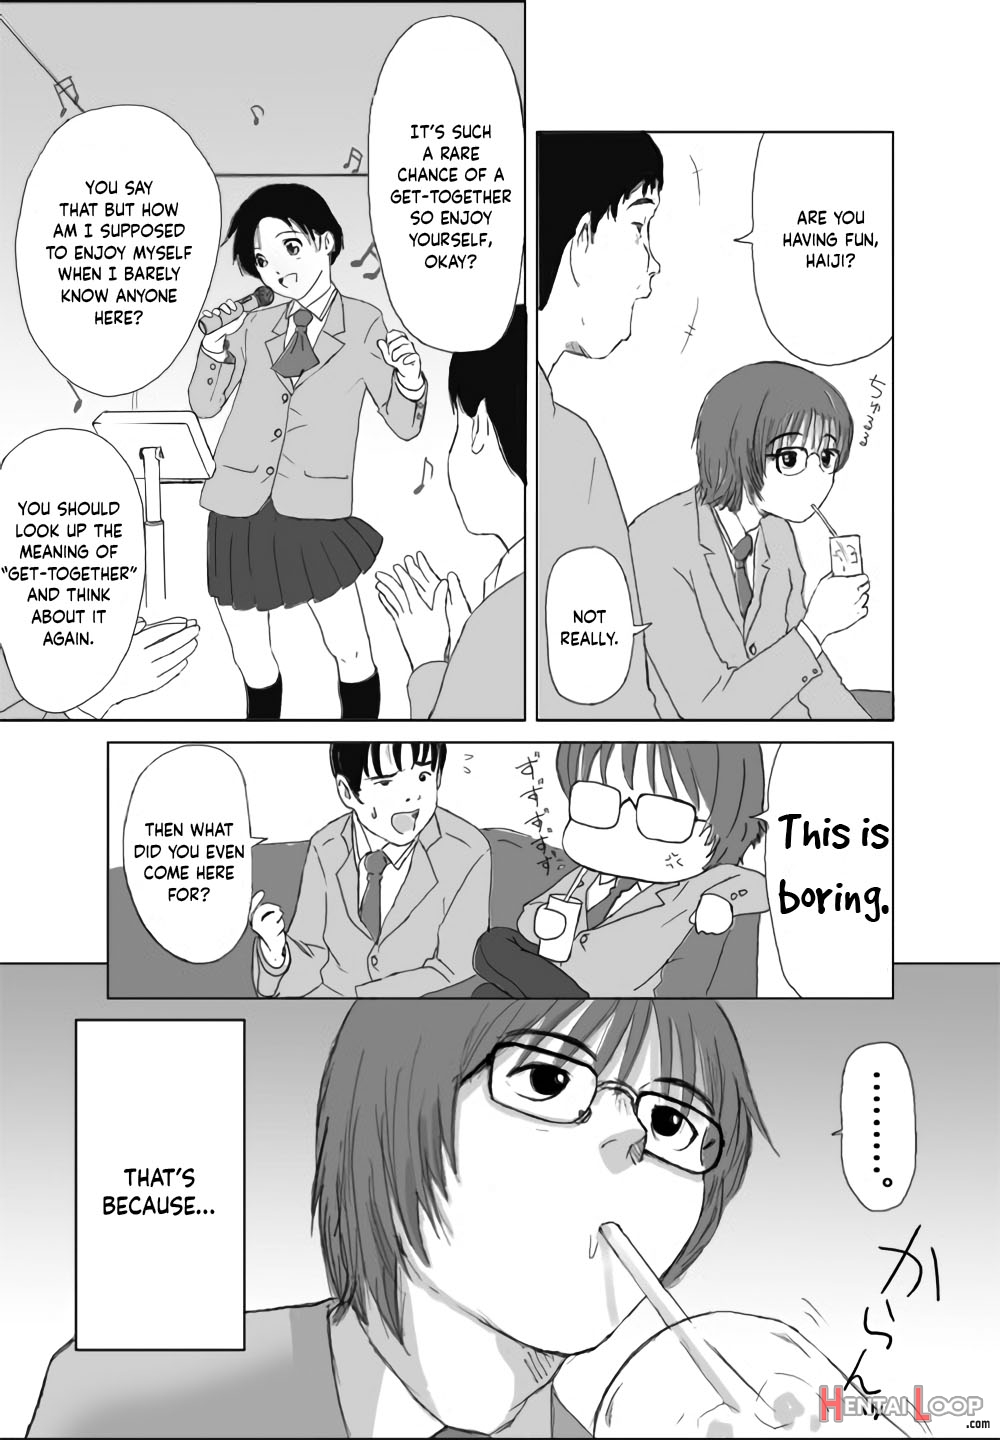 Better Girls Ch. 1-8 page 4